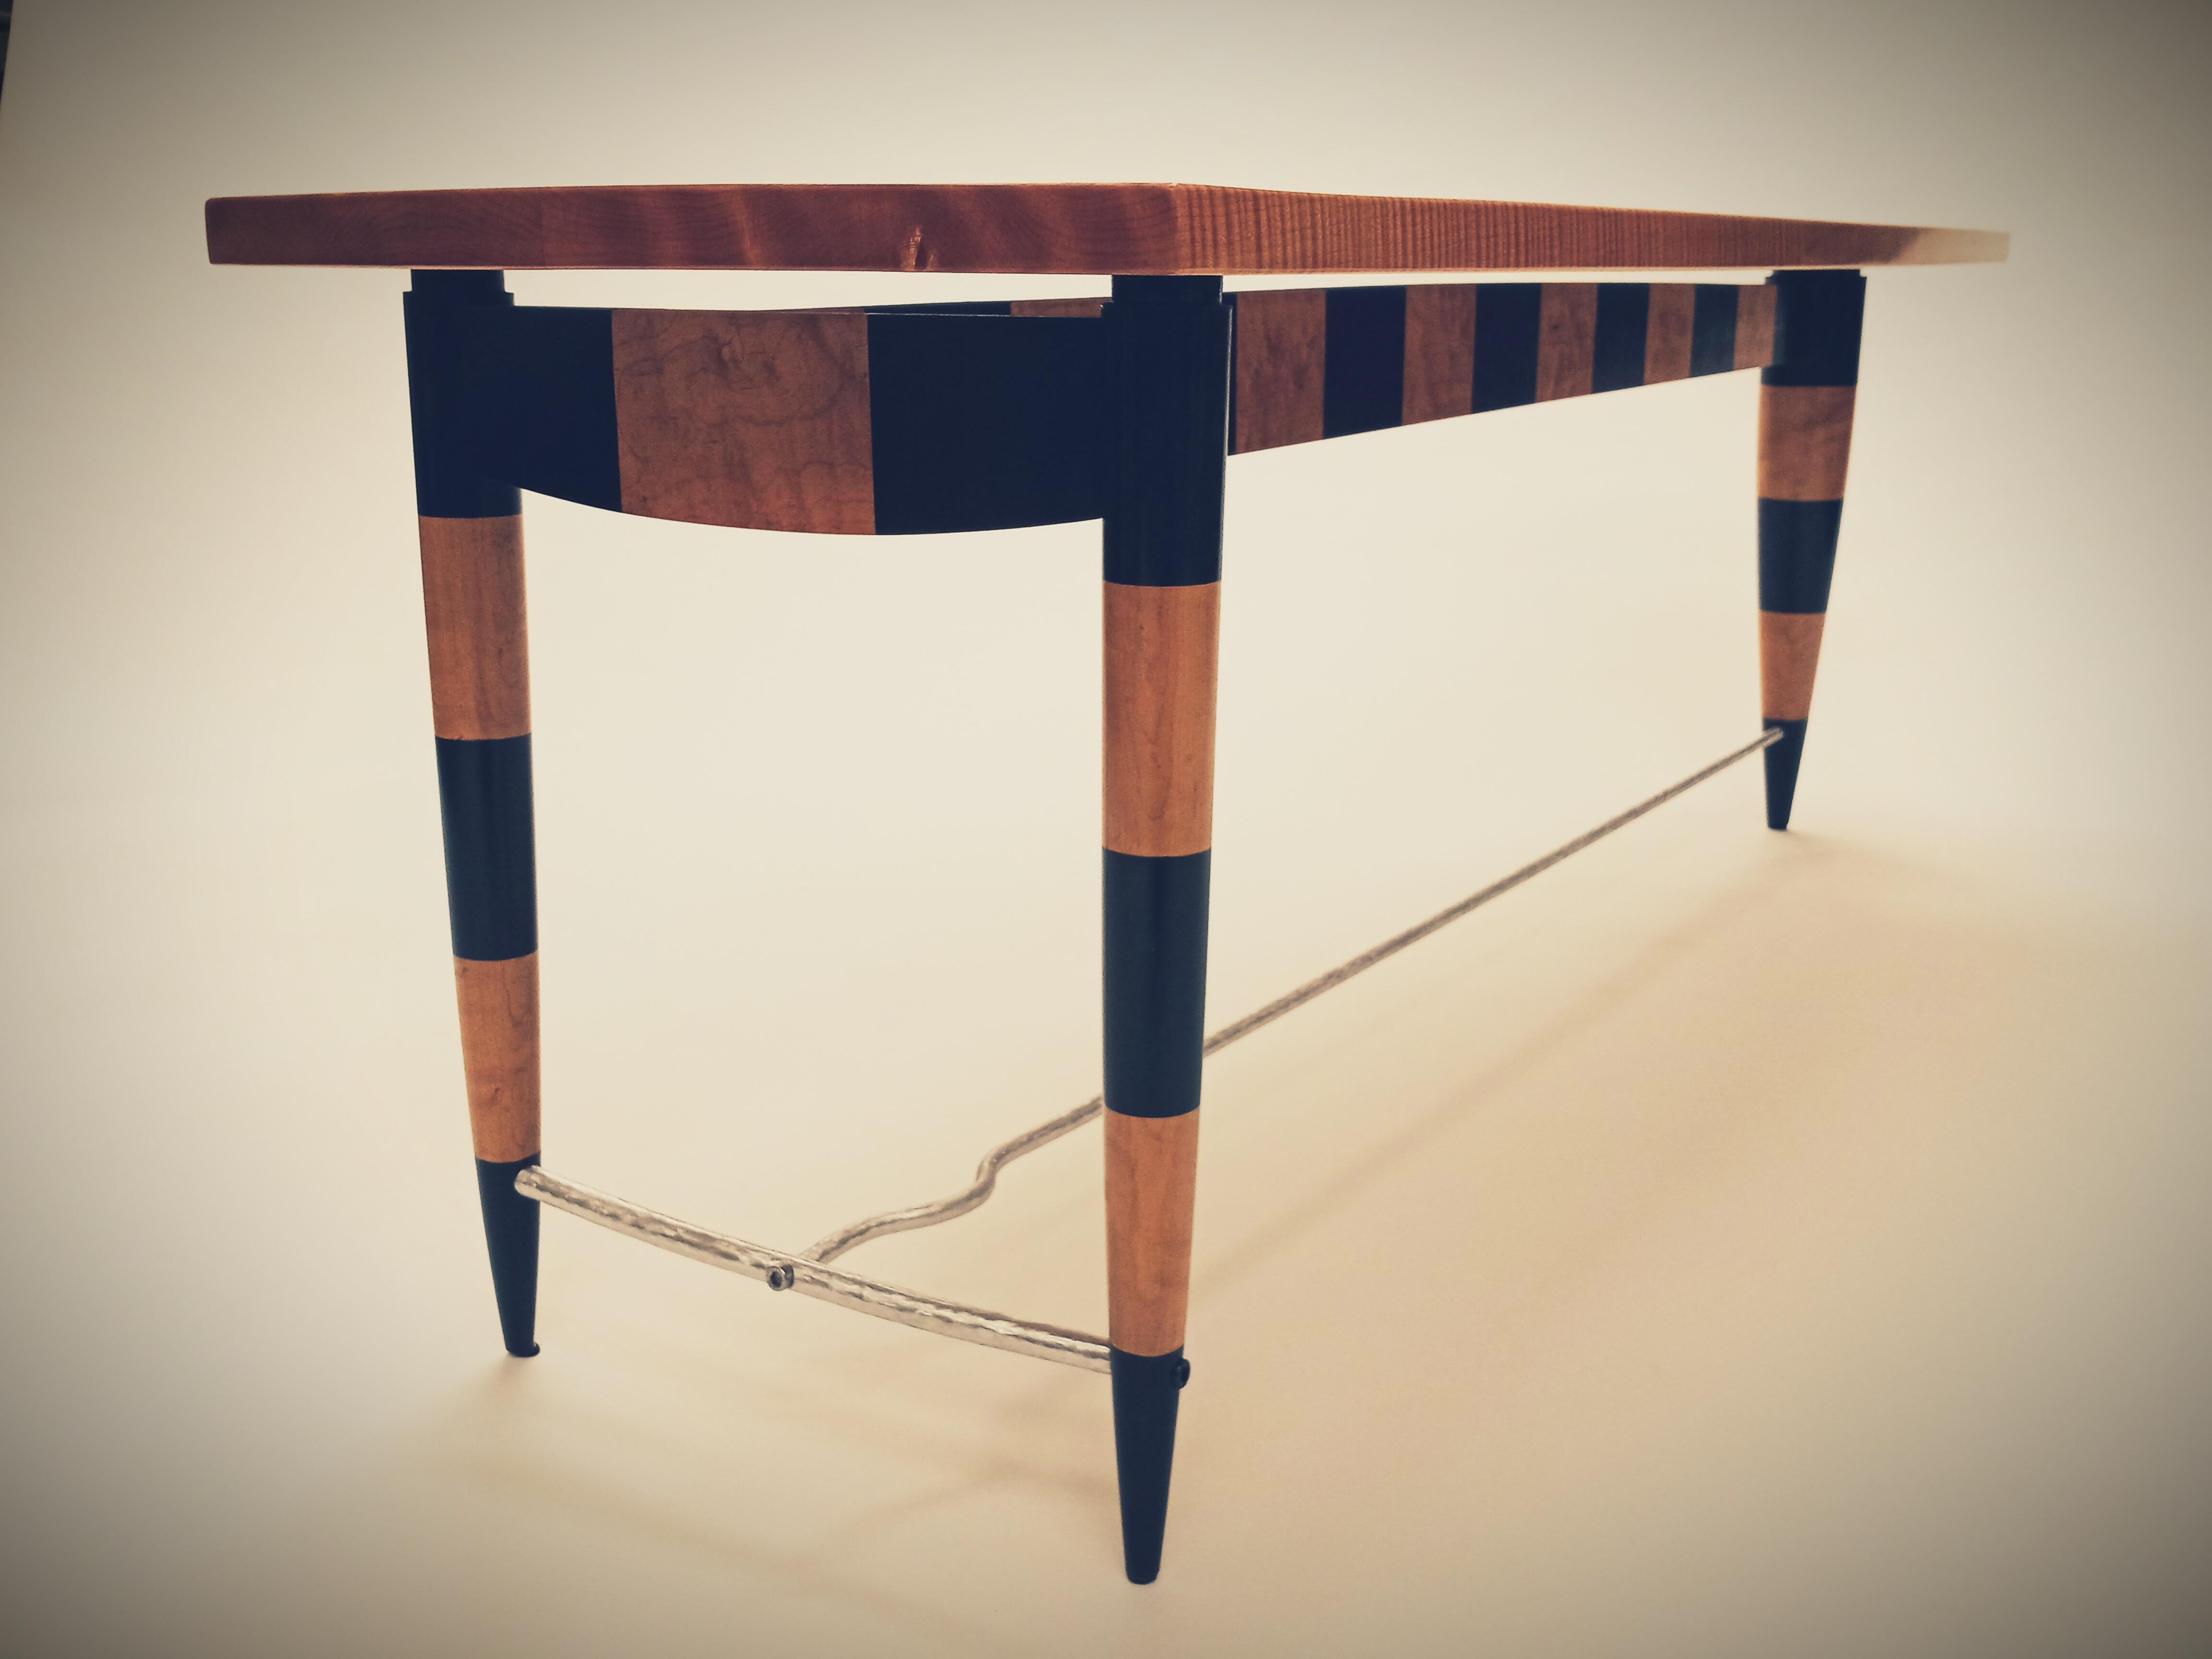 Curley maple coffee table is part of a larger series of work entitled 